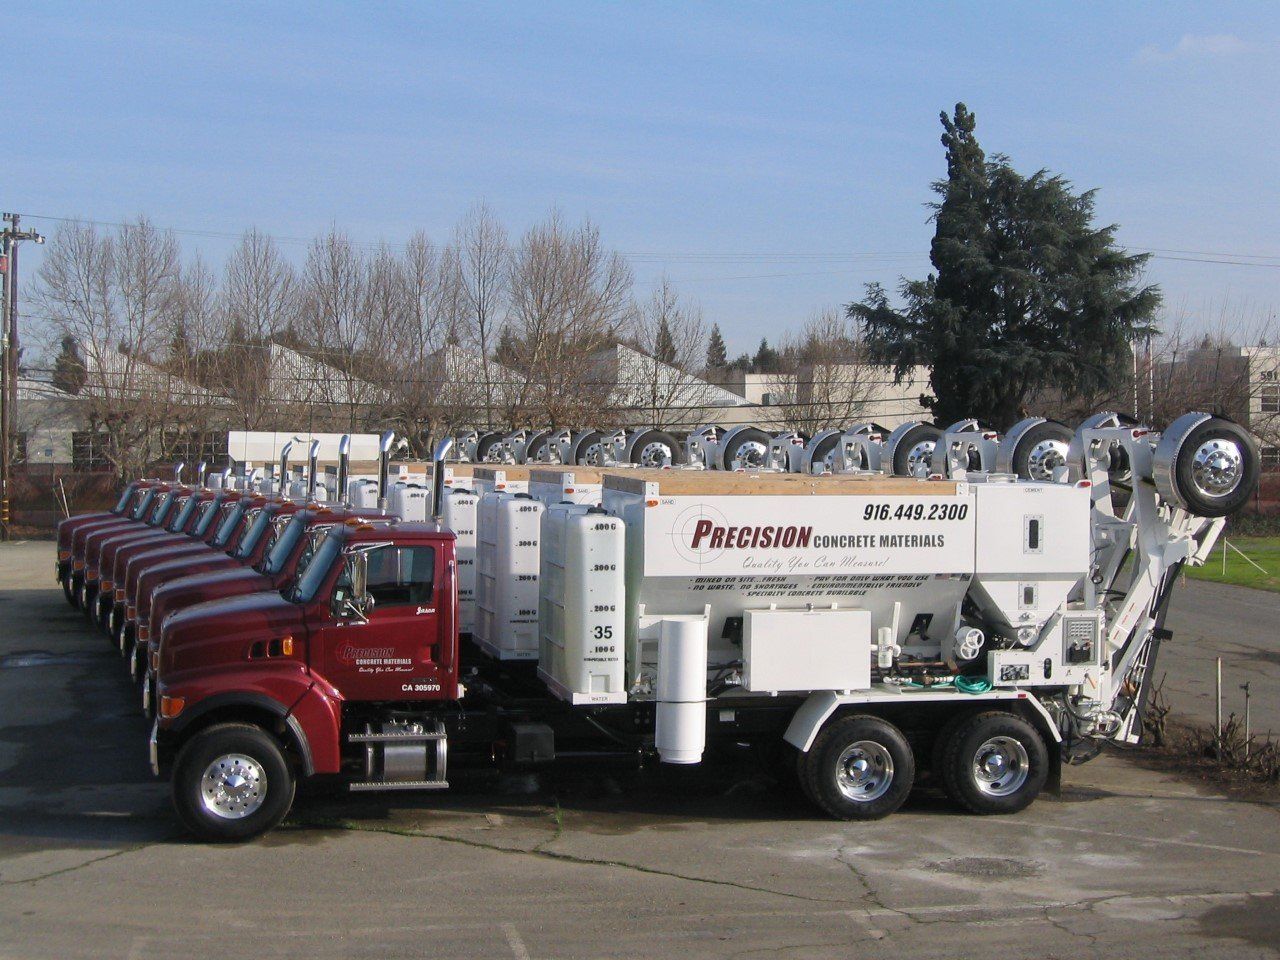 Image of 9 Precision Concrete Materials Trucks Lined up Side By Side